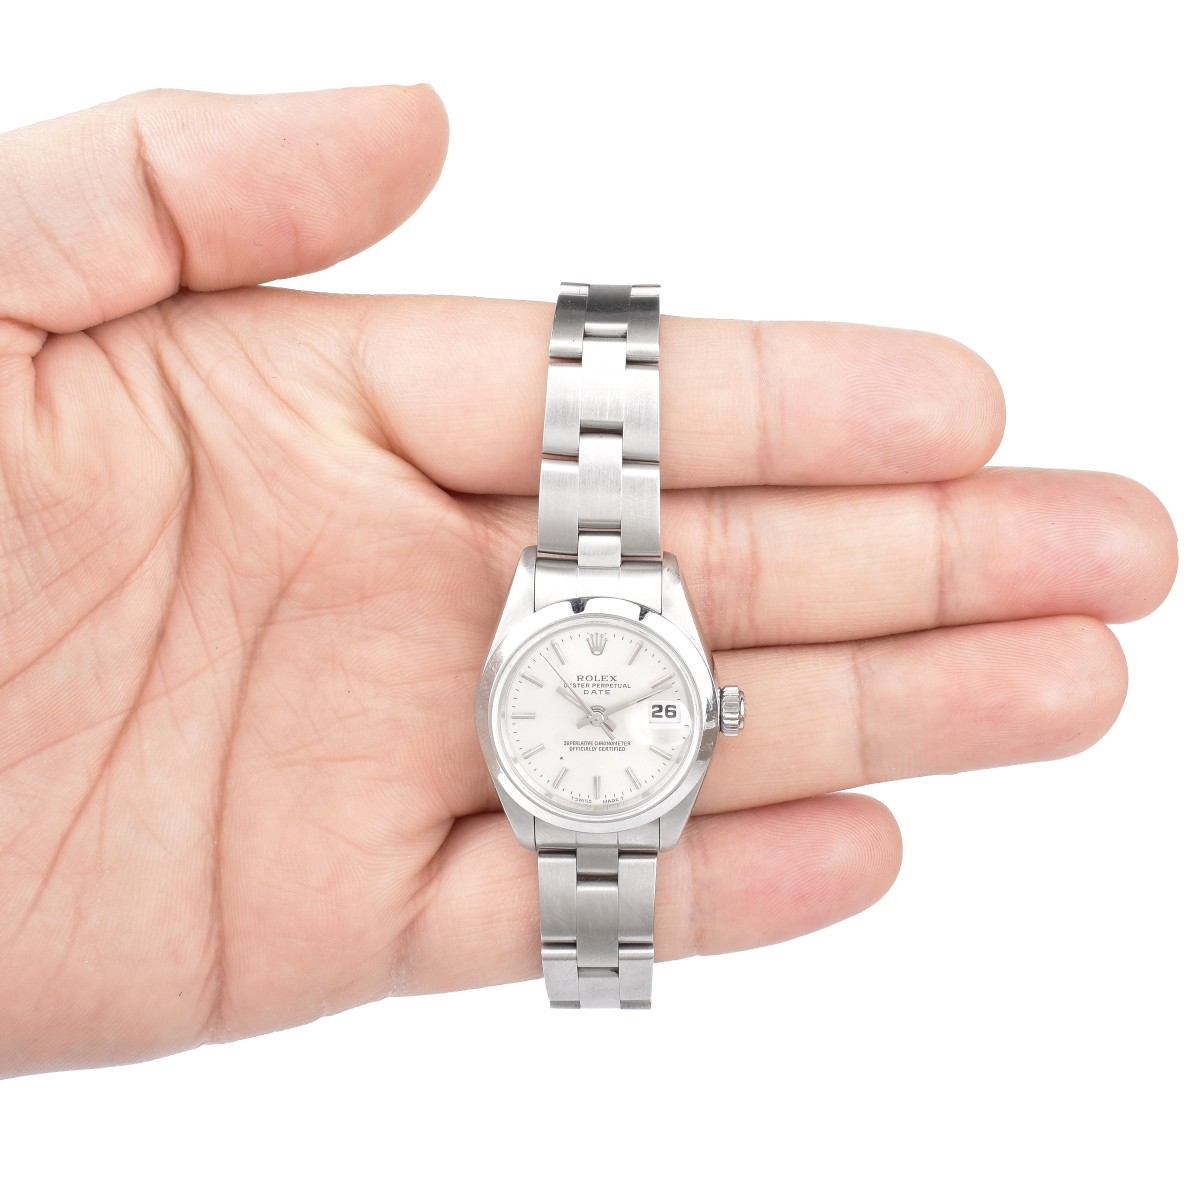 Rolex Lady's Datejust Oyster Perpetual Watch